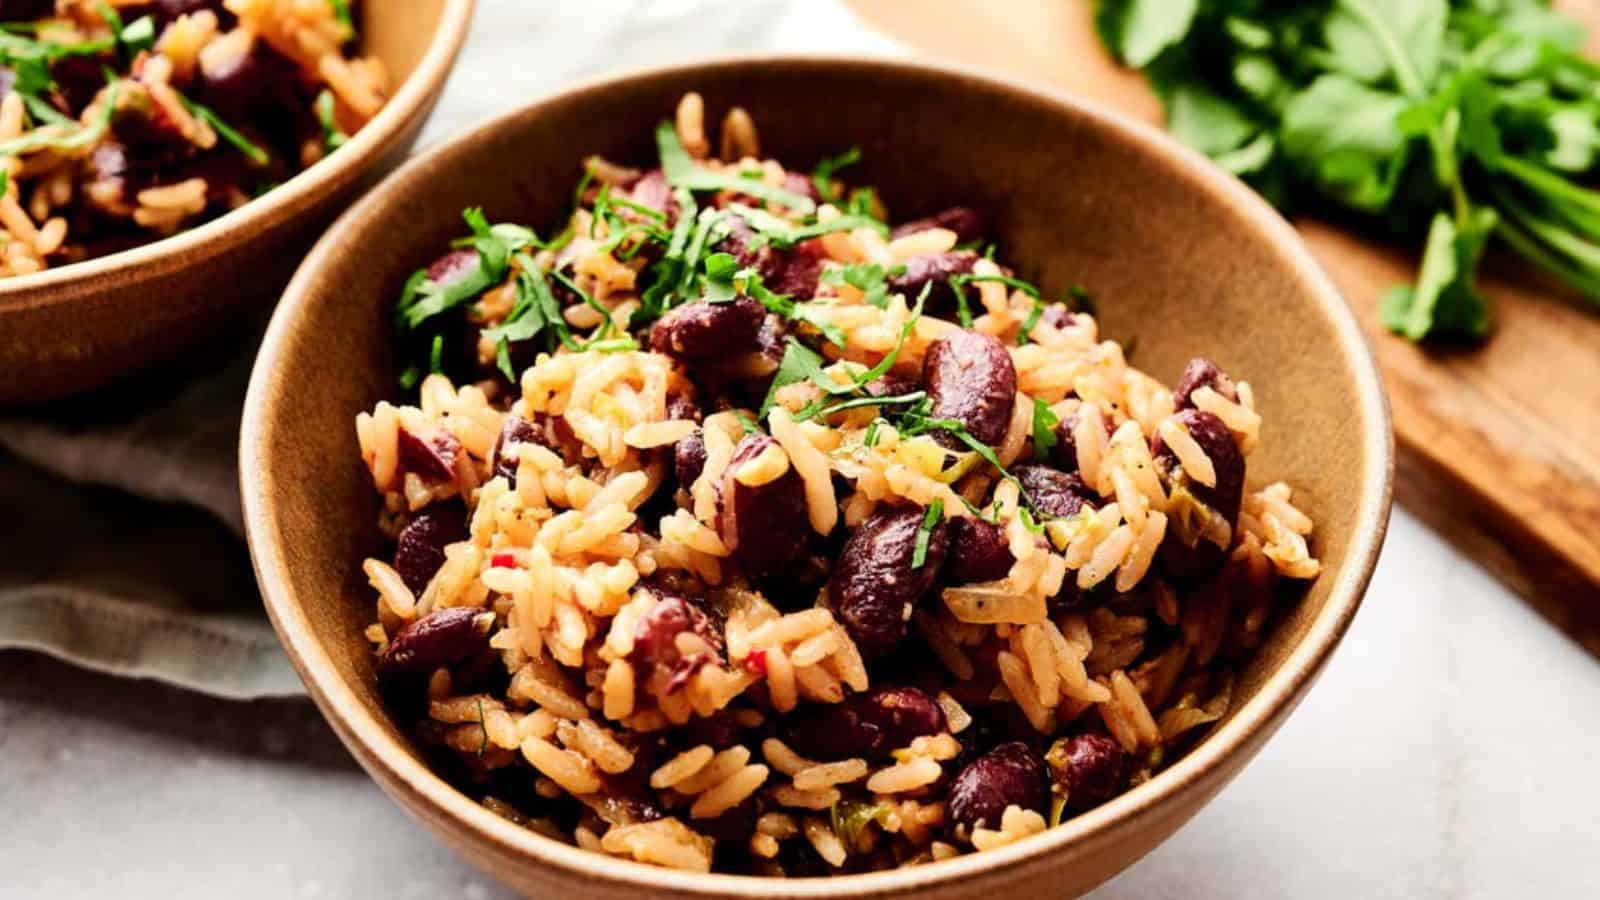 A bowl of cooked rice mixed with kidney beans, garnished with chopped herbs on top, placed on a light-colored surface with fresh greens on a wooden board in the background.